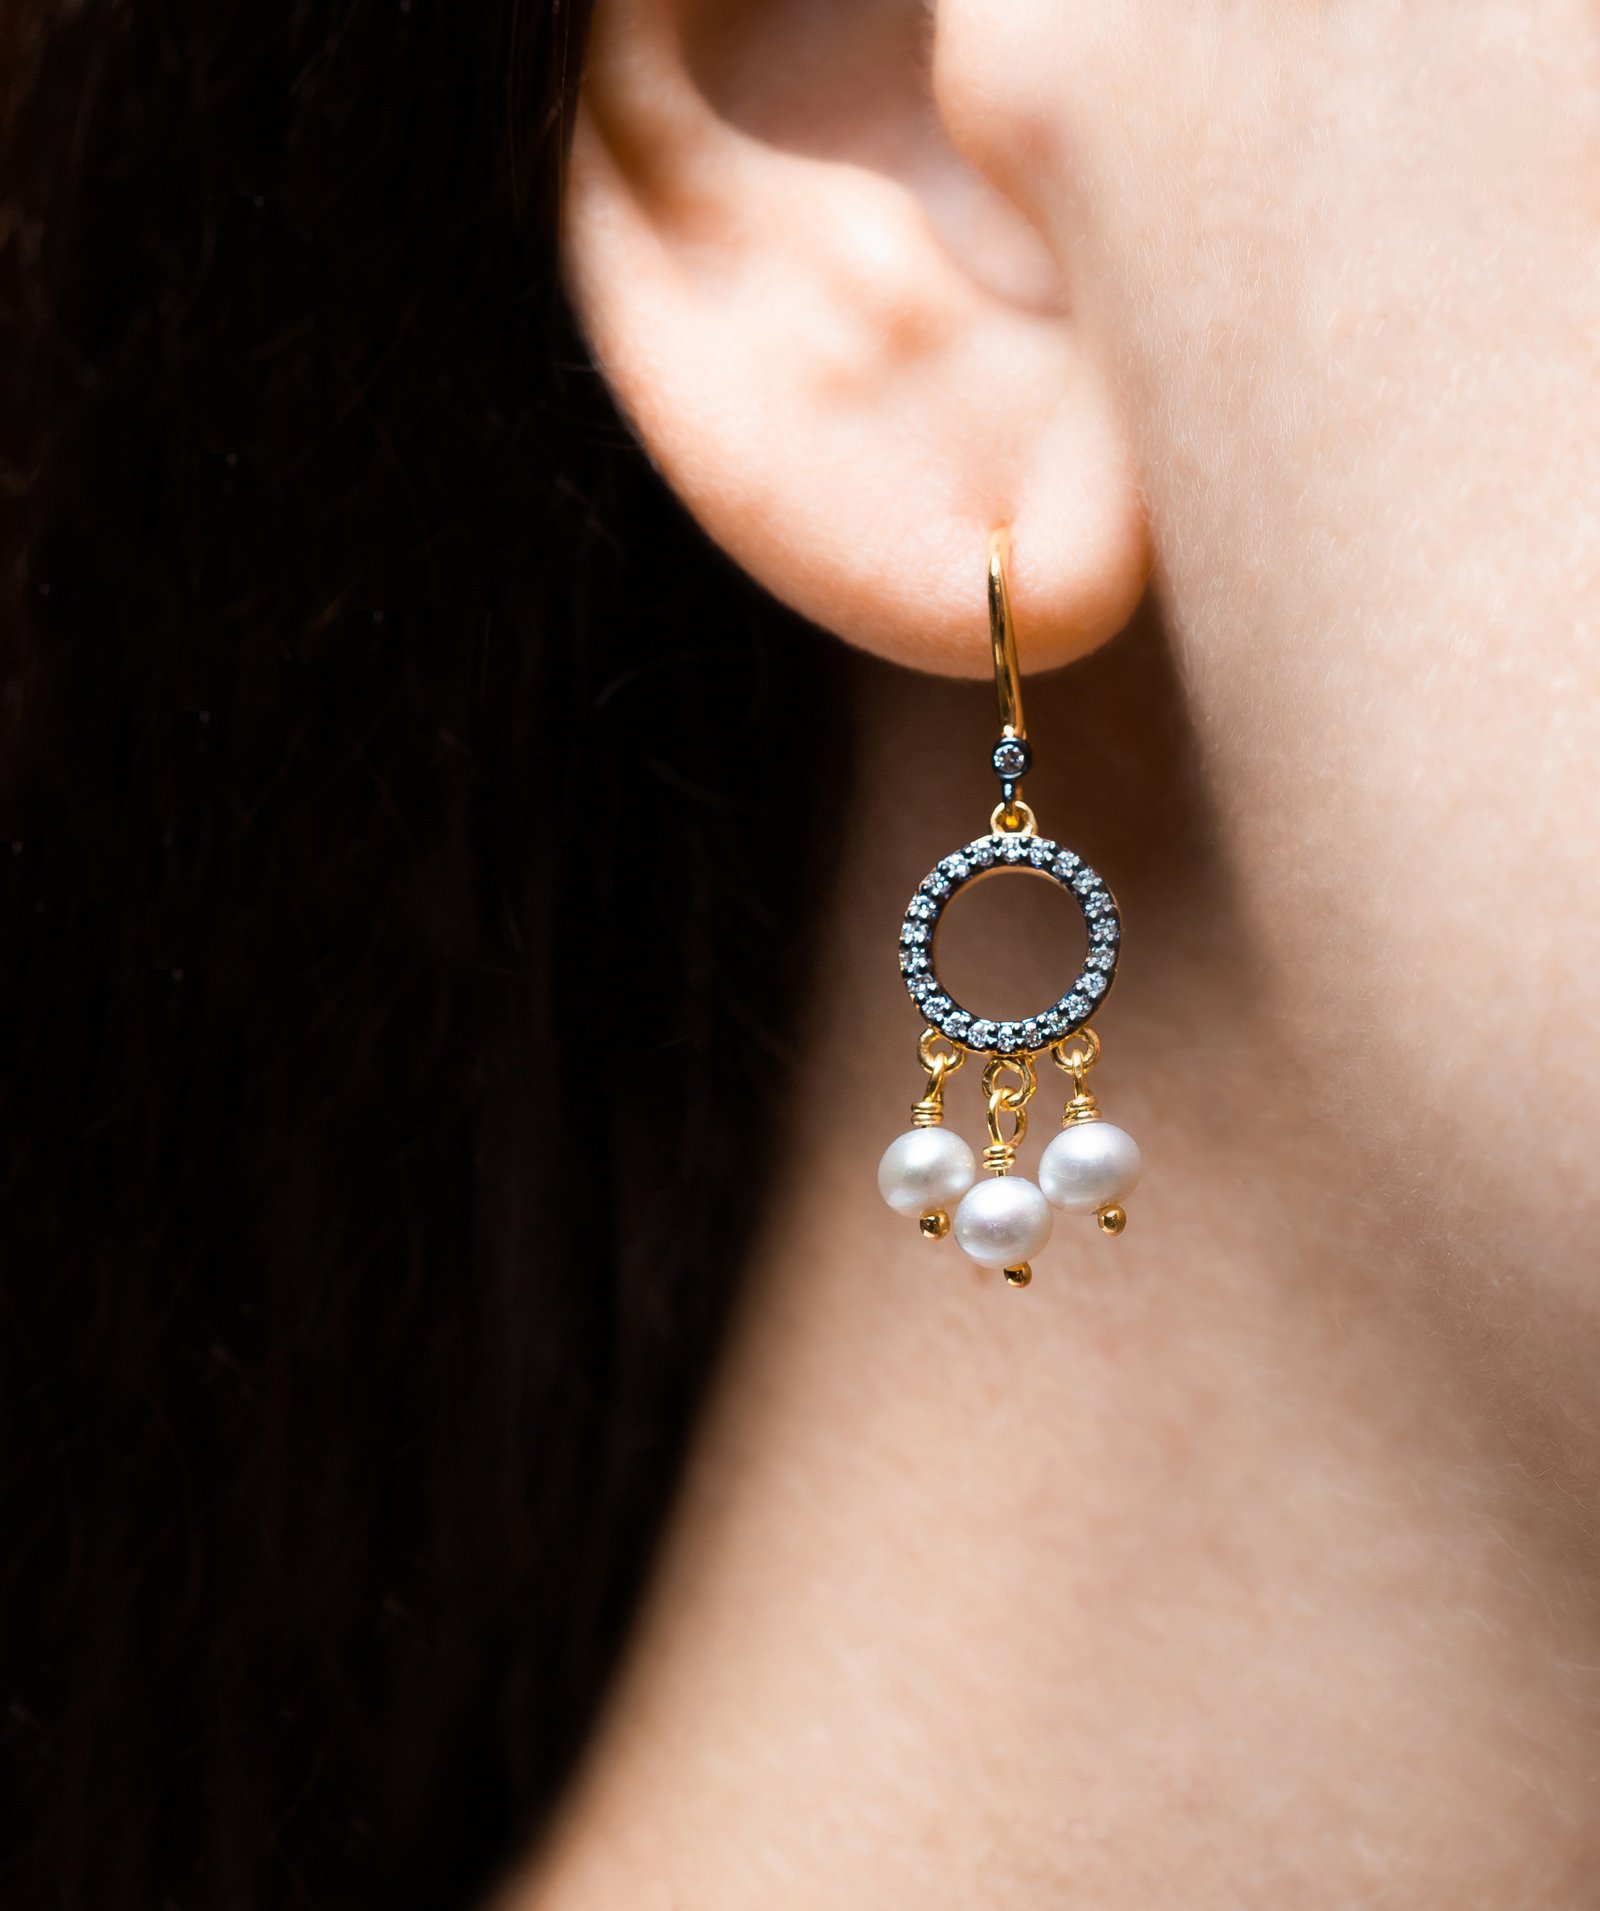 Earrings gold with fw pearls and diamonds